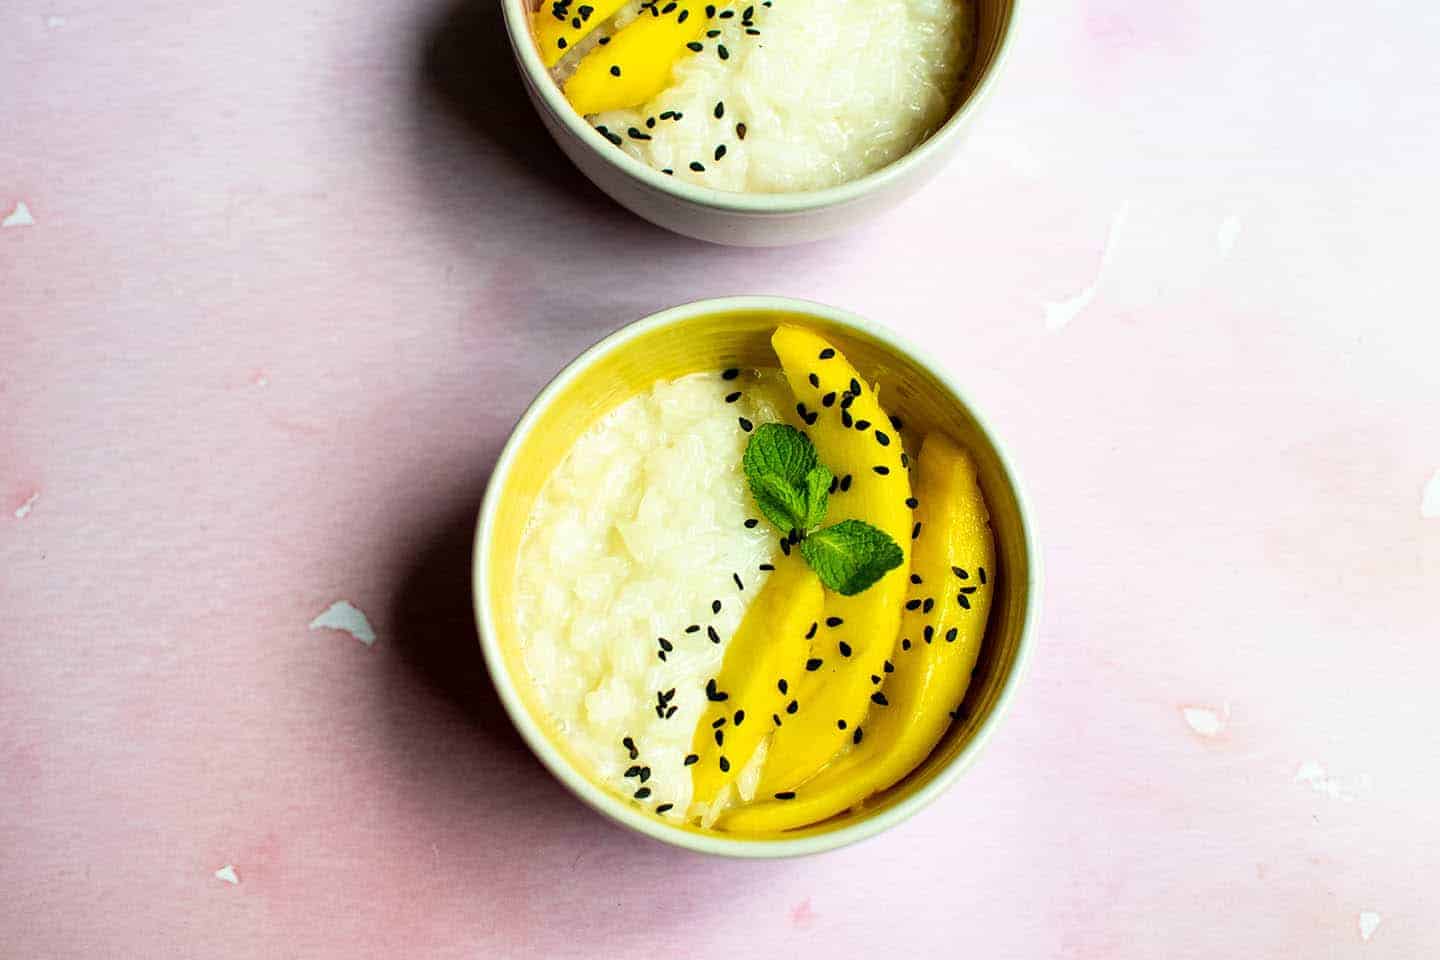 A closer photo of one of the bowls of mango sticky rice. It's on a pink worktop and has black sesame seeds and fresh mint scattered on top.